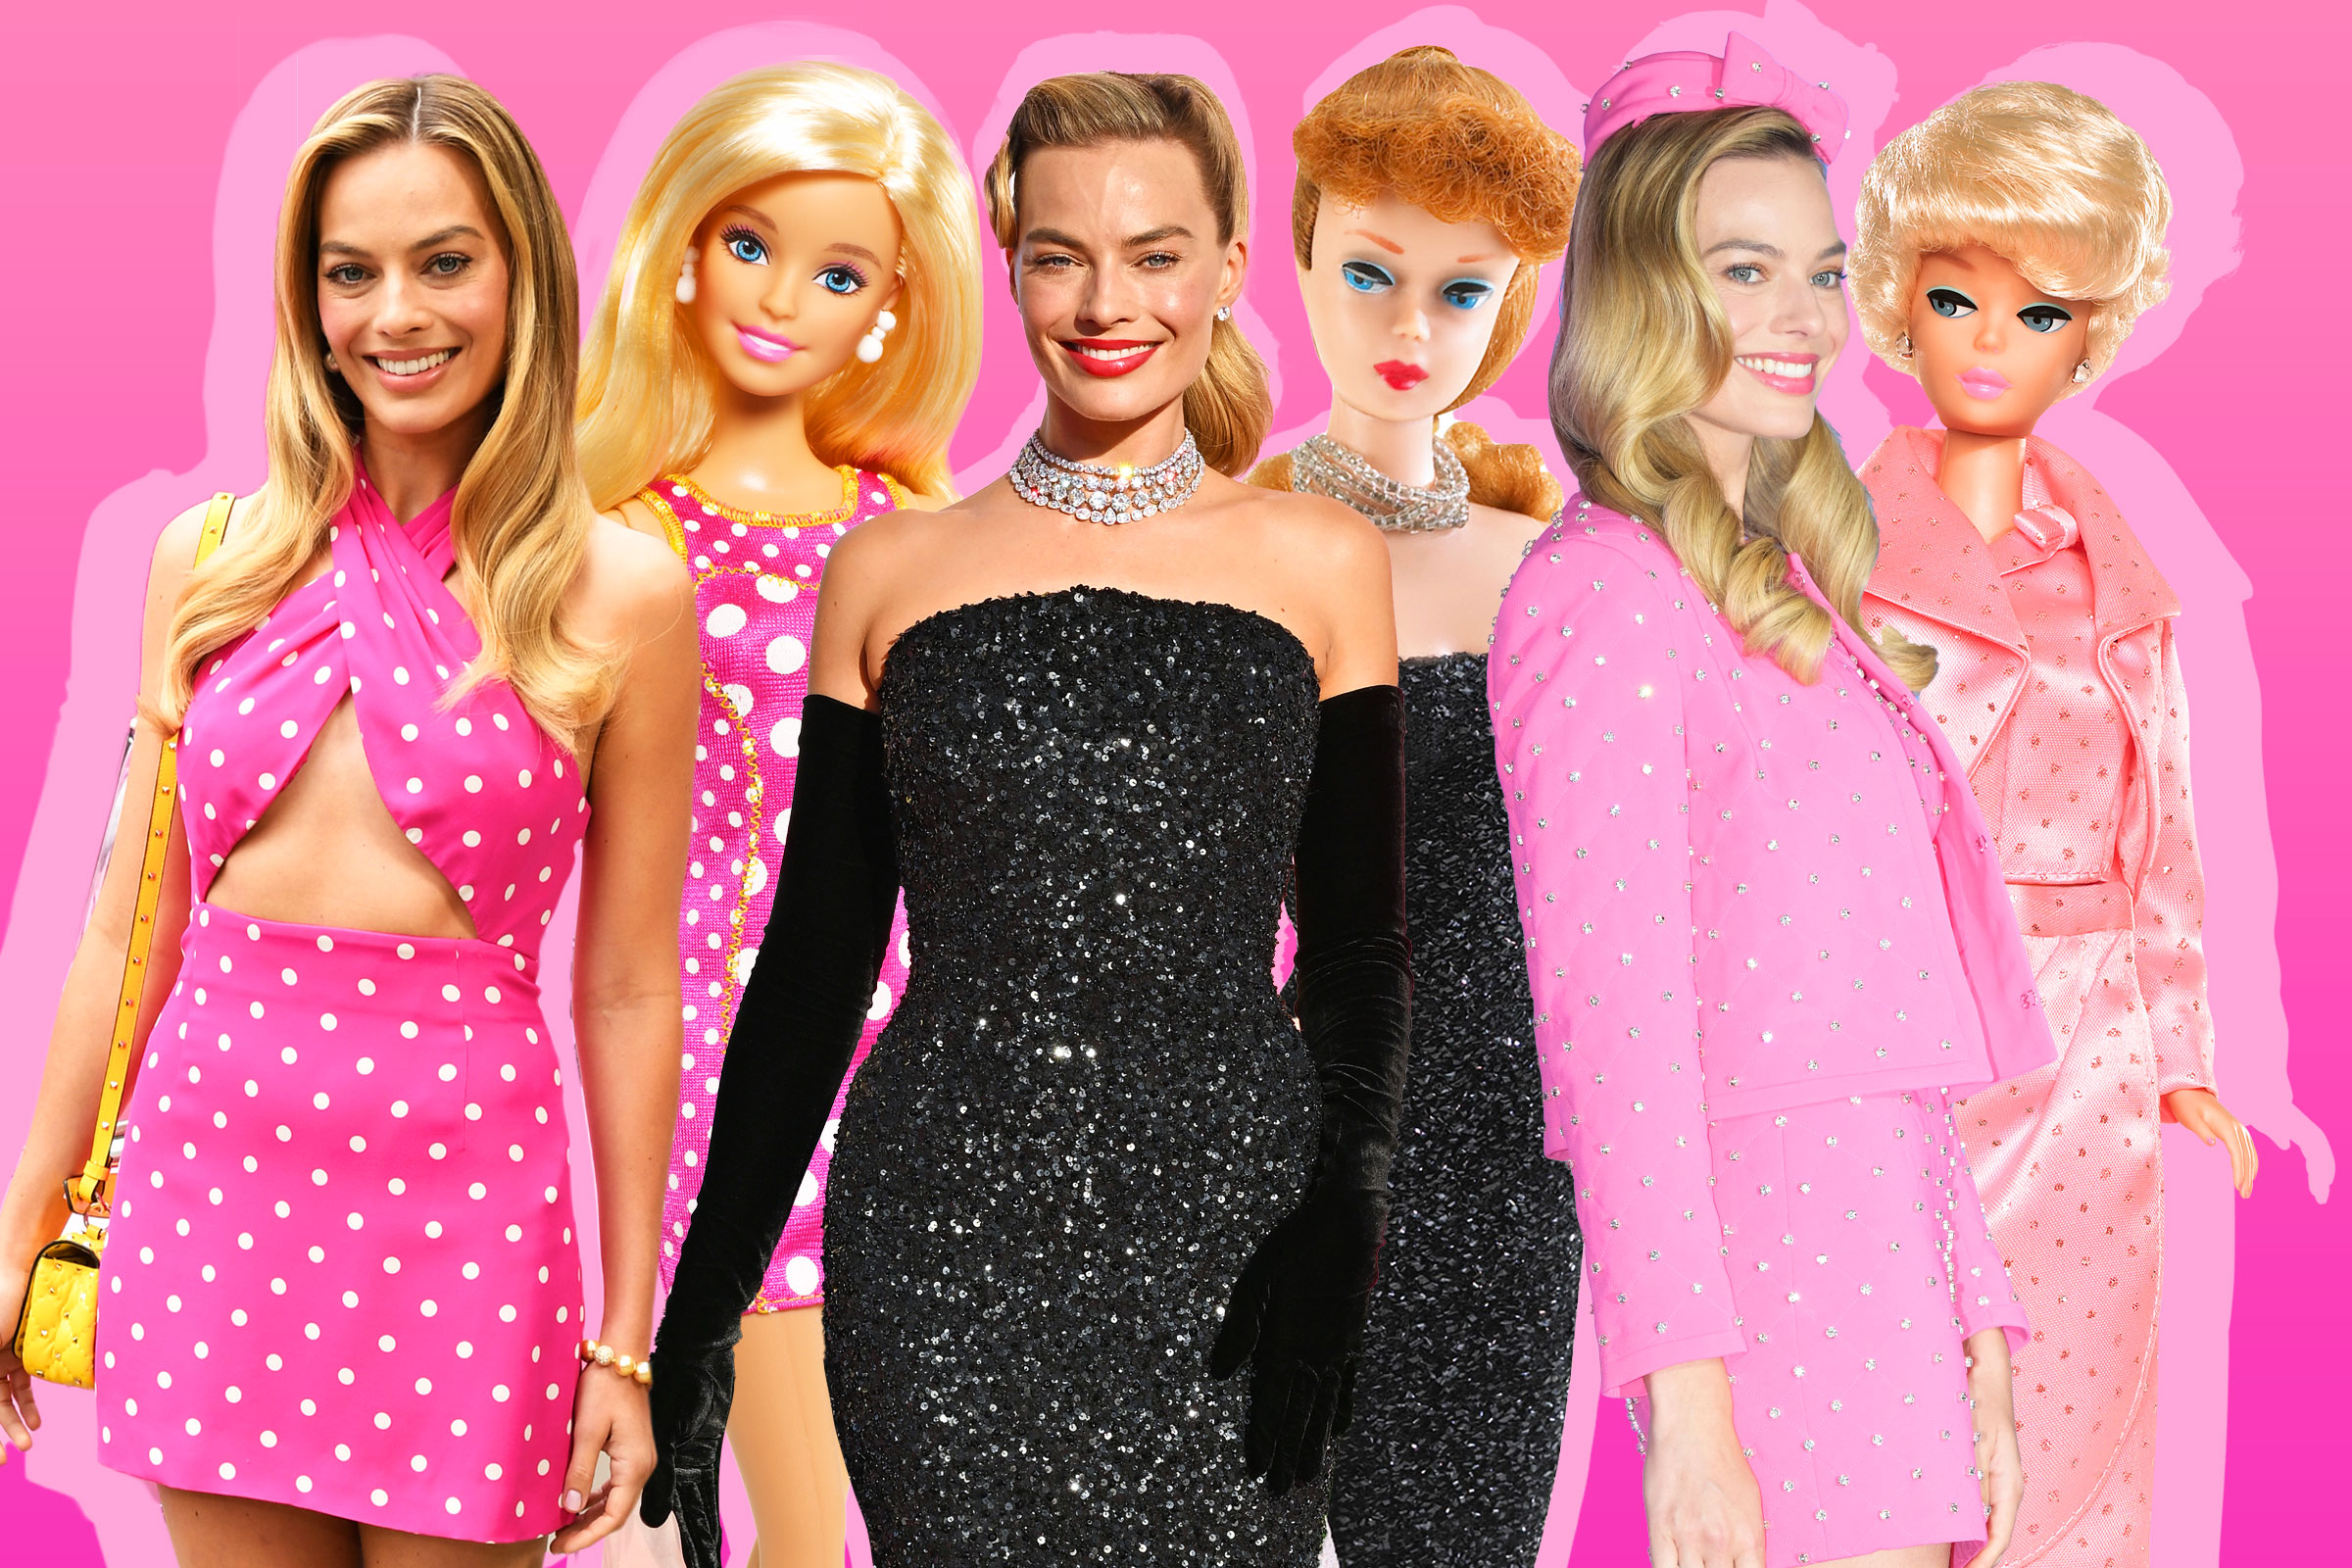 A collage of images of Margot Robbie on the red carpet for the Barbie movie mixed with the Barbie dolls that match her outfit